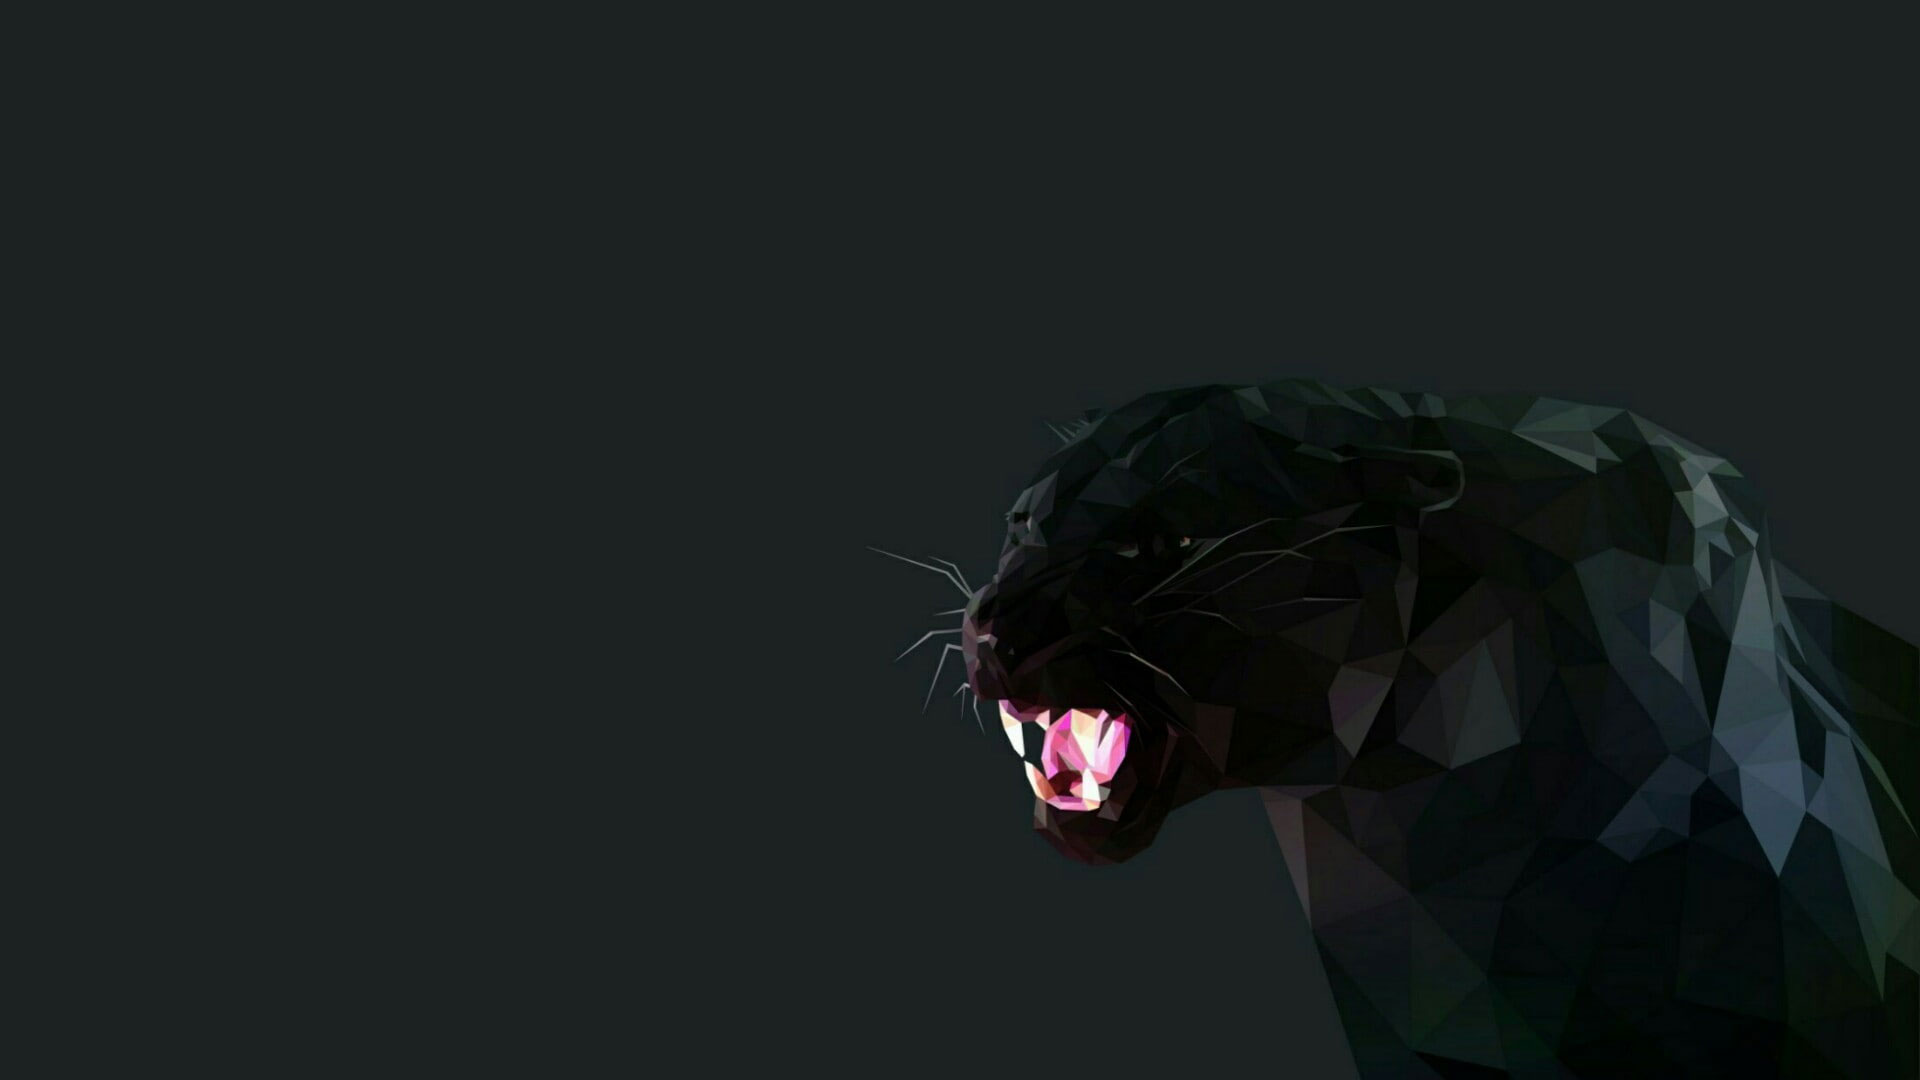 Panther wallpaper, lowpoly, low poly, art, graphics, artwork, black panther